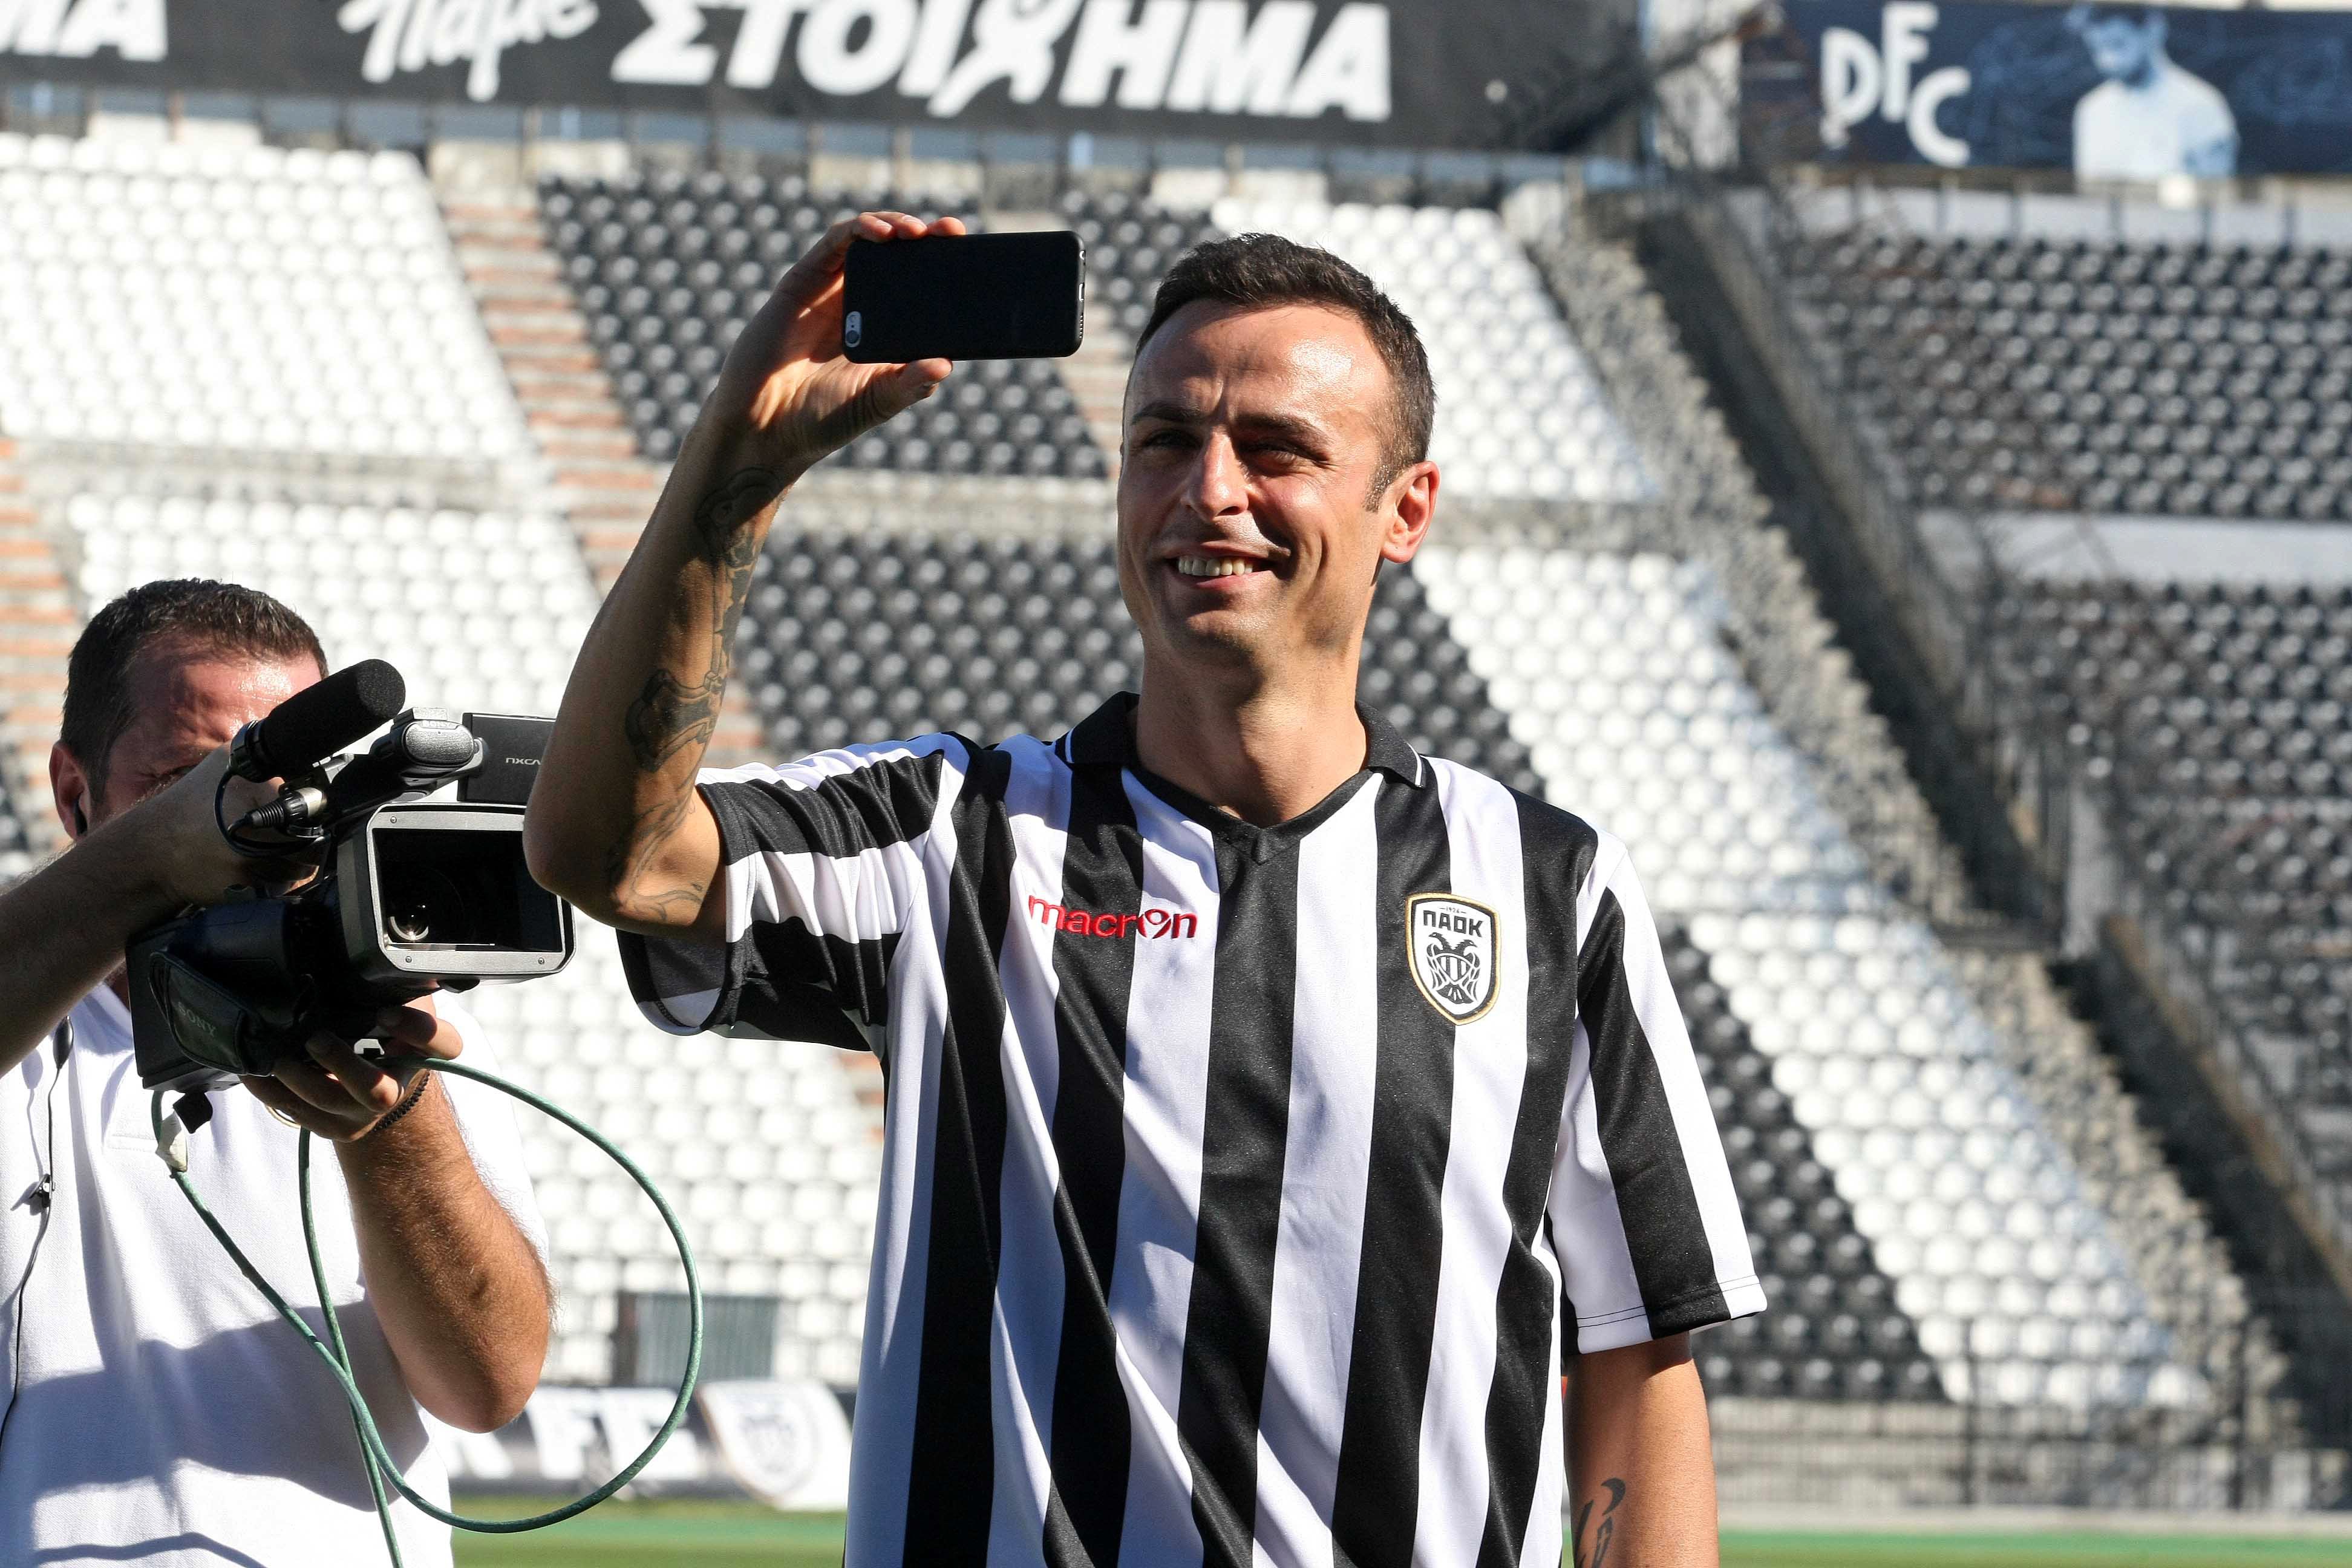 PAOK's new  Bulgarian foward Dimitar Berbatov takes a selfie during his presentation at the Toumpa Stadium in Thessaloniki on September 3, 2015. Berbatov has signed to play for one season with PAOK, the Greek Super League club announced on September 3, 2015. (Photo by Sakis Mitrolidis/AFP/Getty Images)